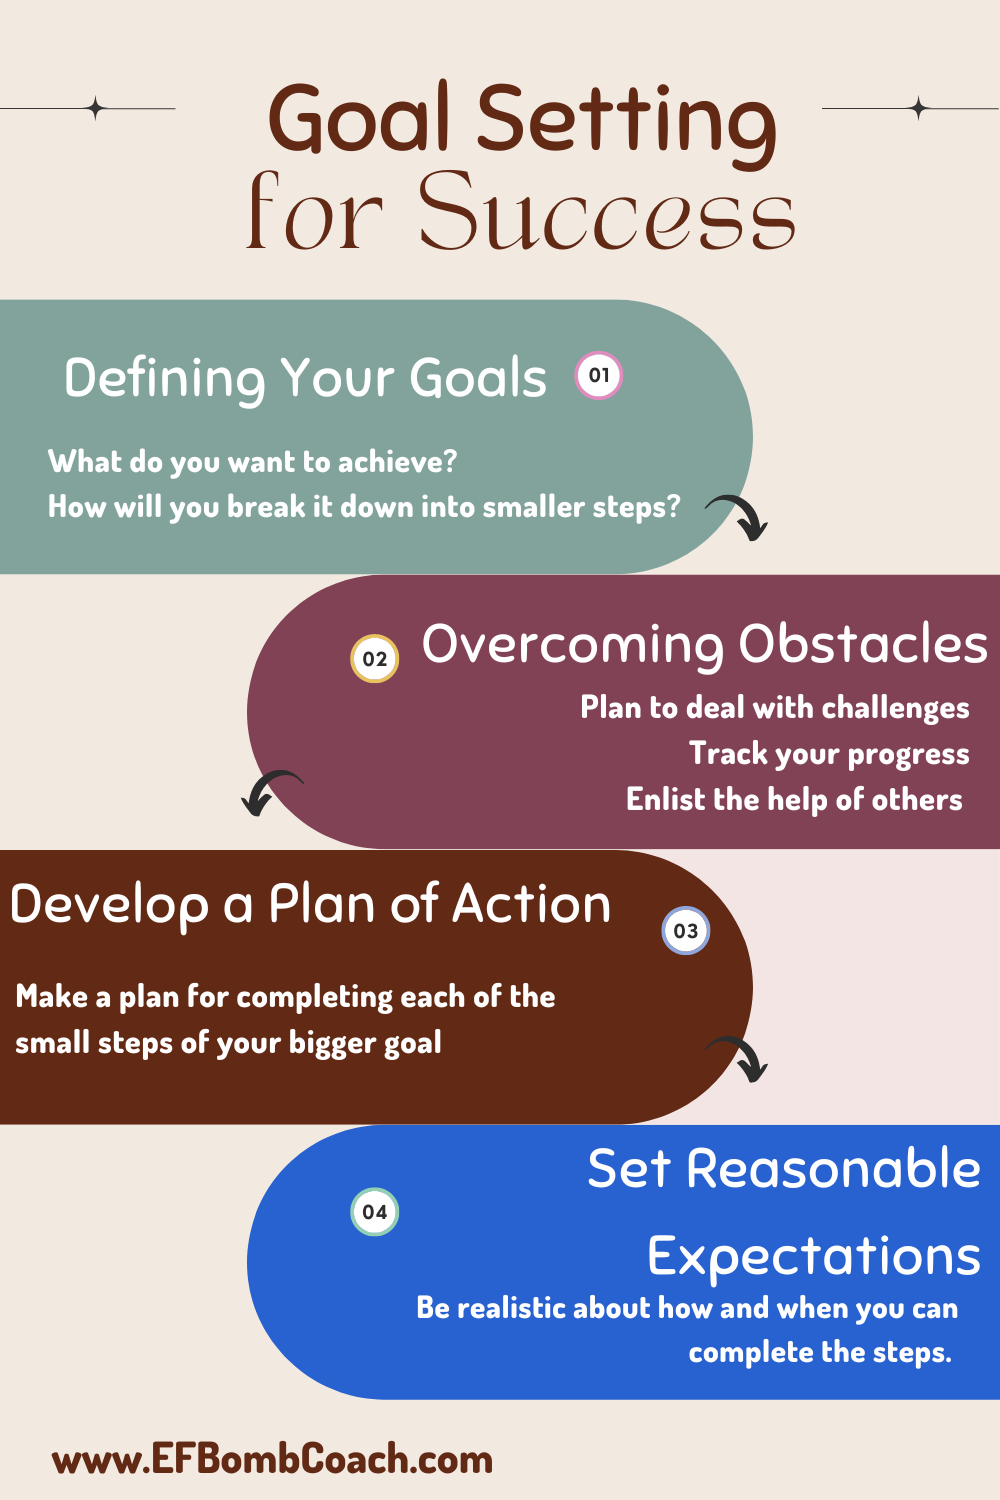 Goal setting for success - defining your goals, overcoming obstacles, develop a plan of actions, set reasonable expectations